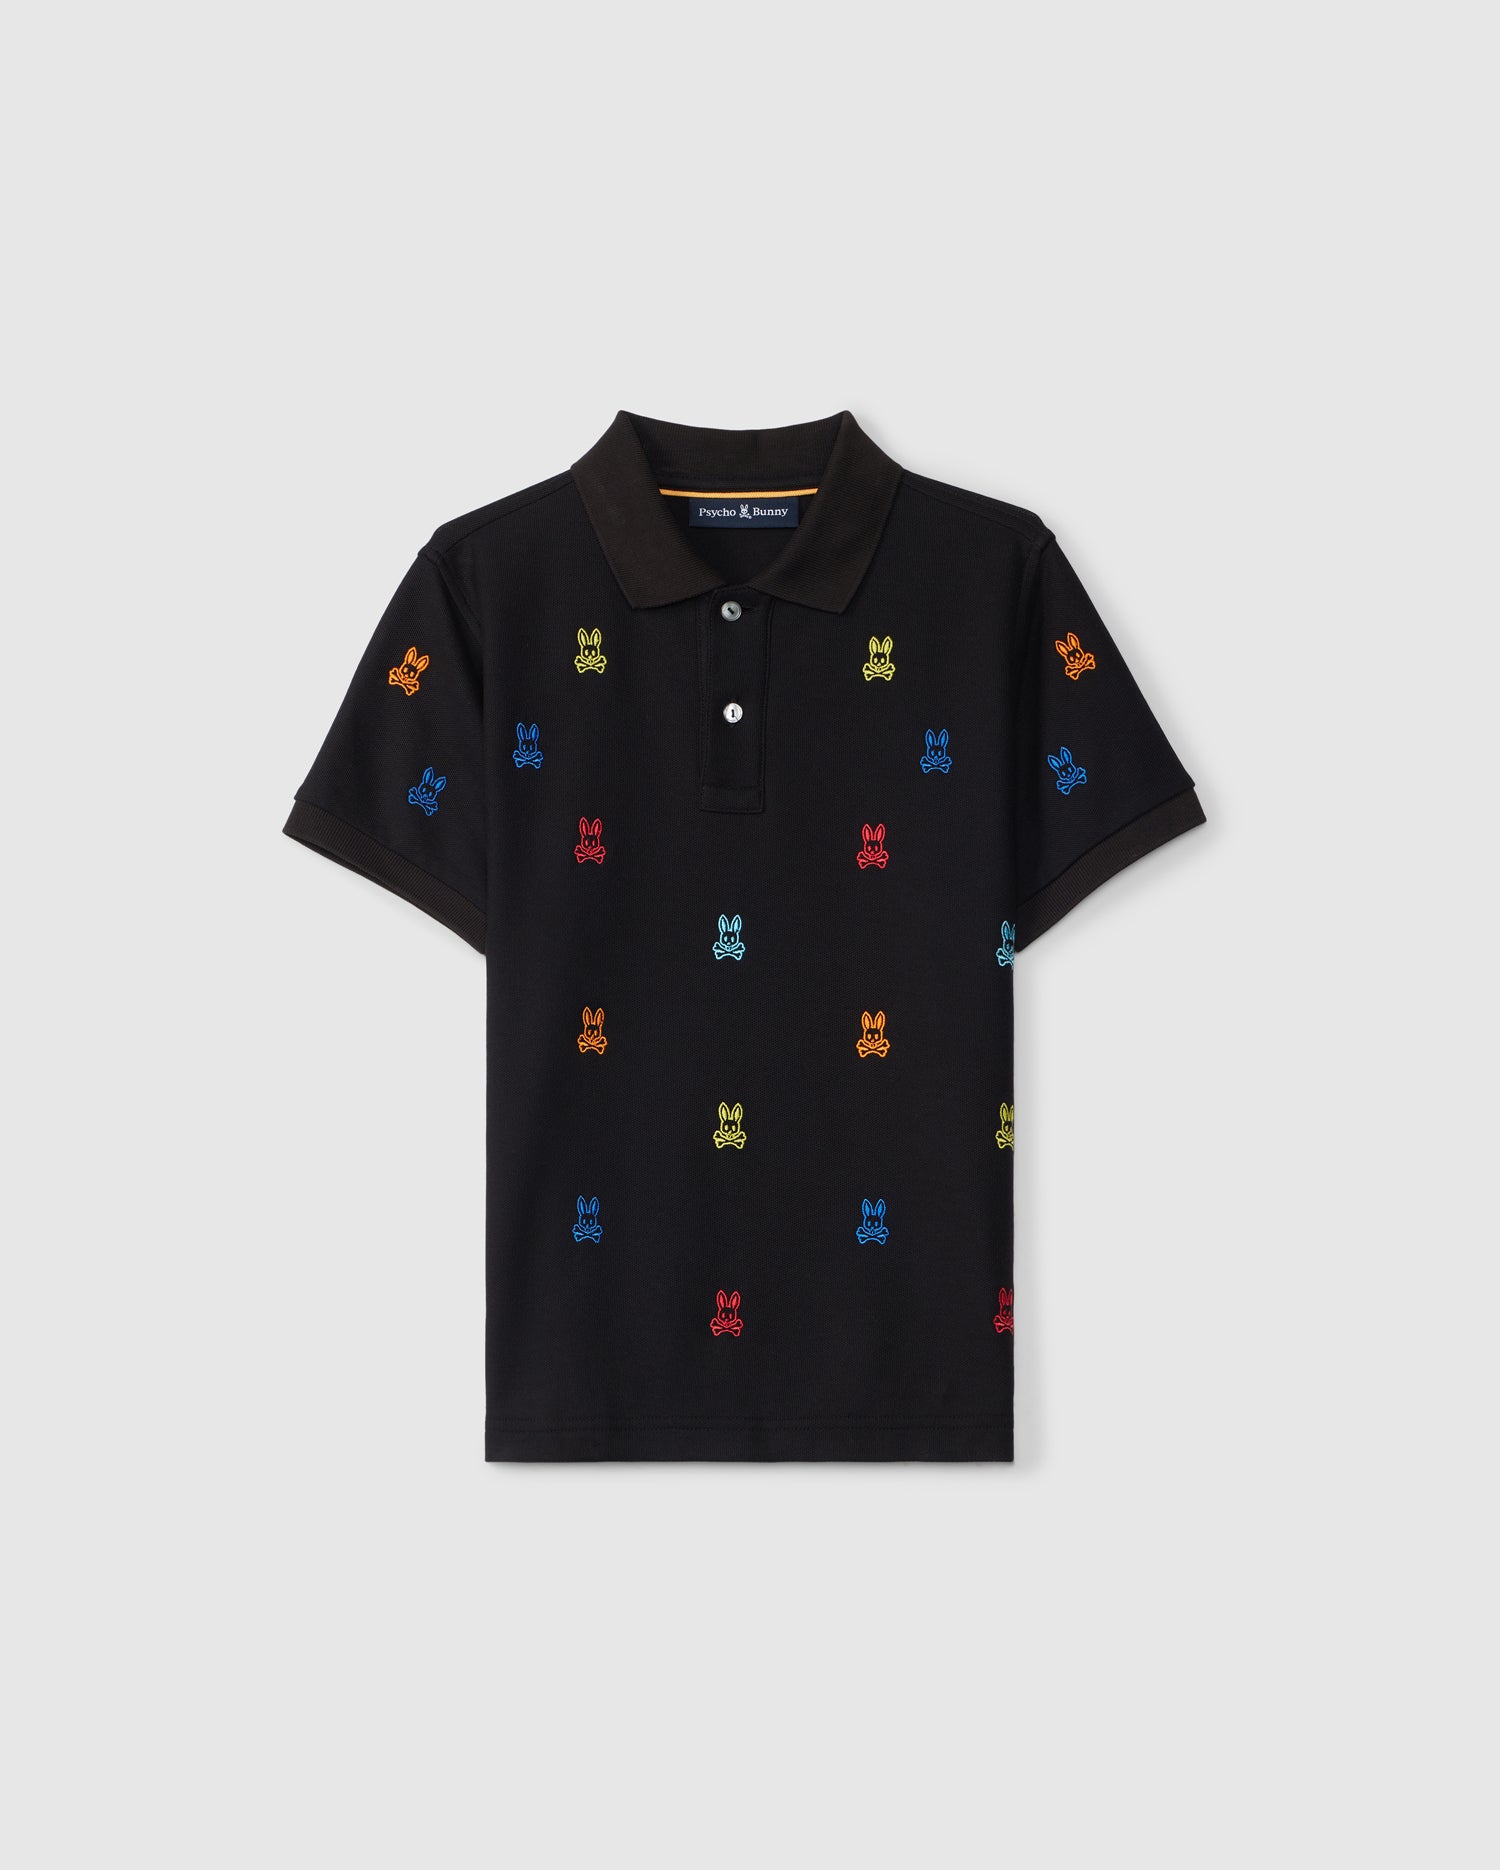 A black KIDS BONHAM ALL OVER BUNNY PIQUE POLO - B0K501C200 by Psycho Bunny, crafted from soft Pima cotton, features a colorful embroidered pattern of small, playful robots in red, blue, green, and yellow. Evenly spaced across the fabric, the shirt has short sleeves and a classic collar with a three-button placket.